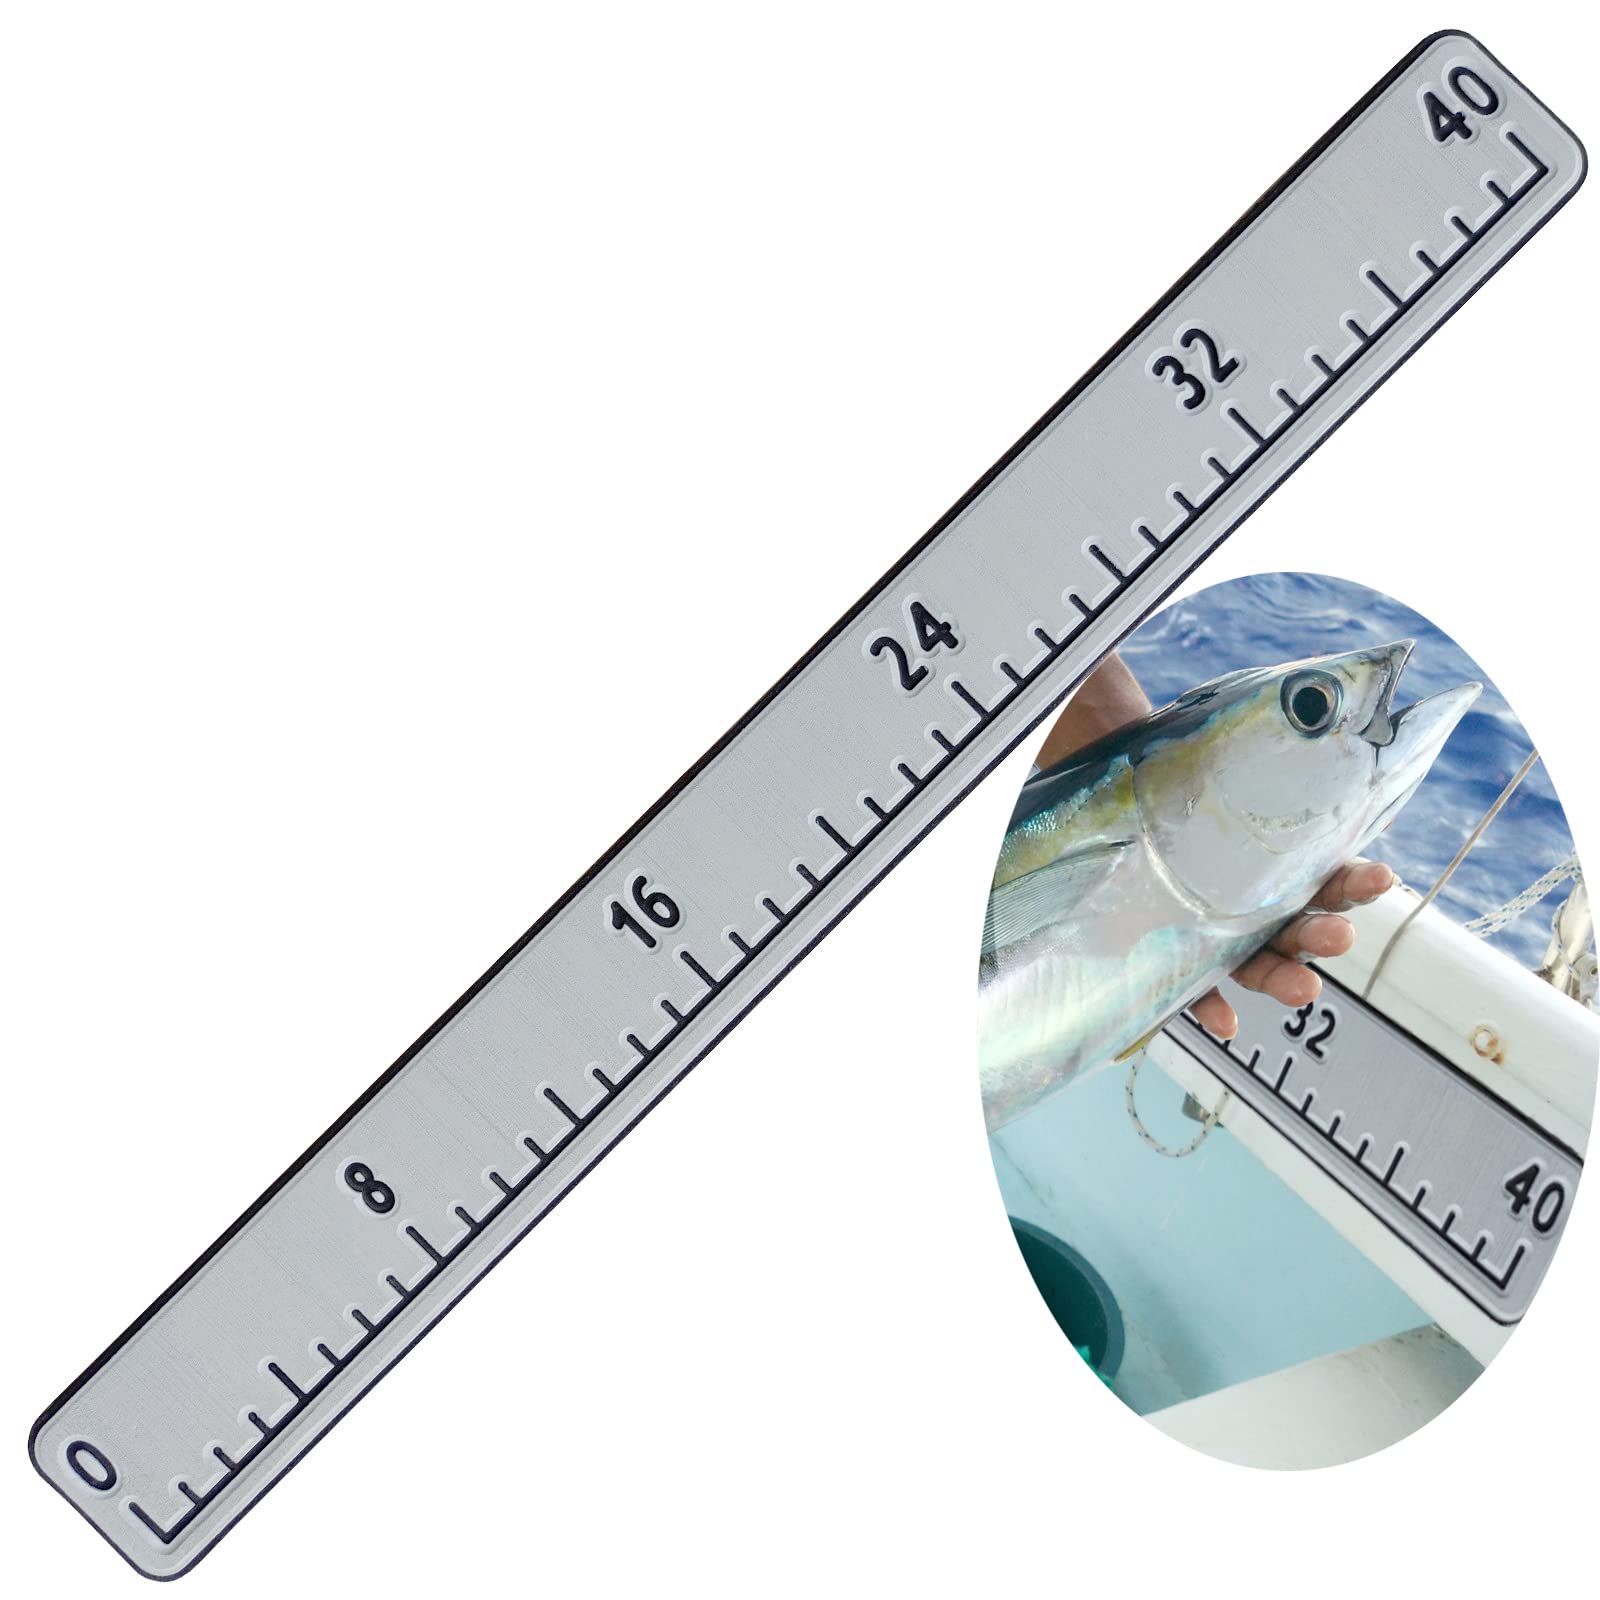 Hzkaicun/Fish Ruler/40/with Backing Adhesive/Fish Measuring Sticker/Foam Fish  Ruler for Boat/Fish Measuring Board/Suitable for/Fish Boat /Cooler/Kayak/Yacht/Fish Ruler Boat Accessories 40 Light gray